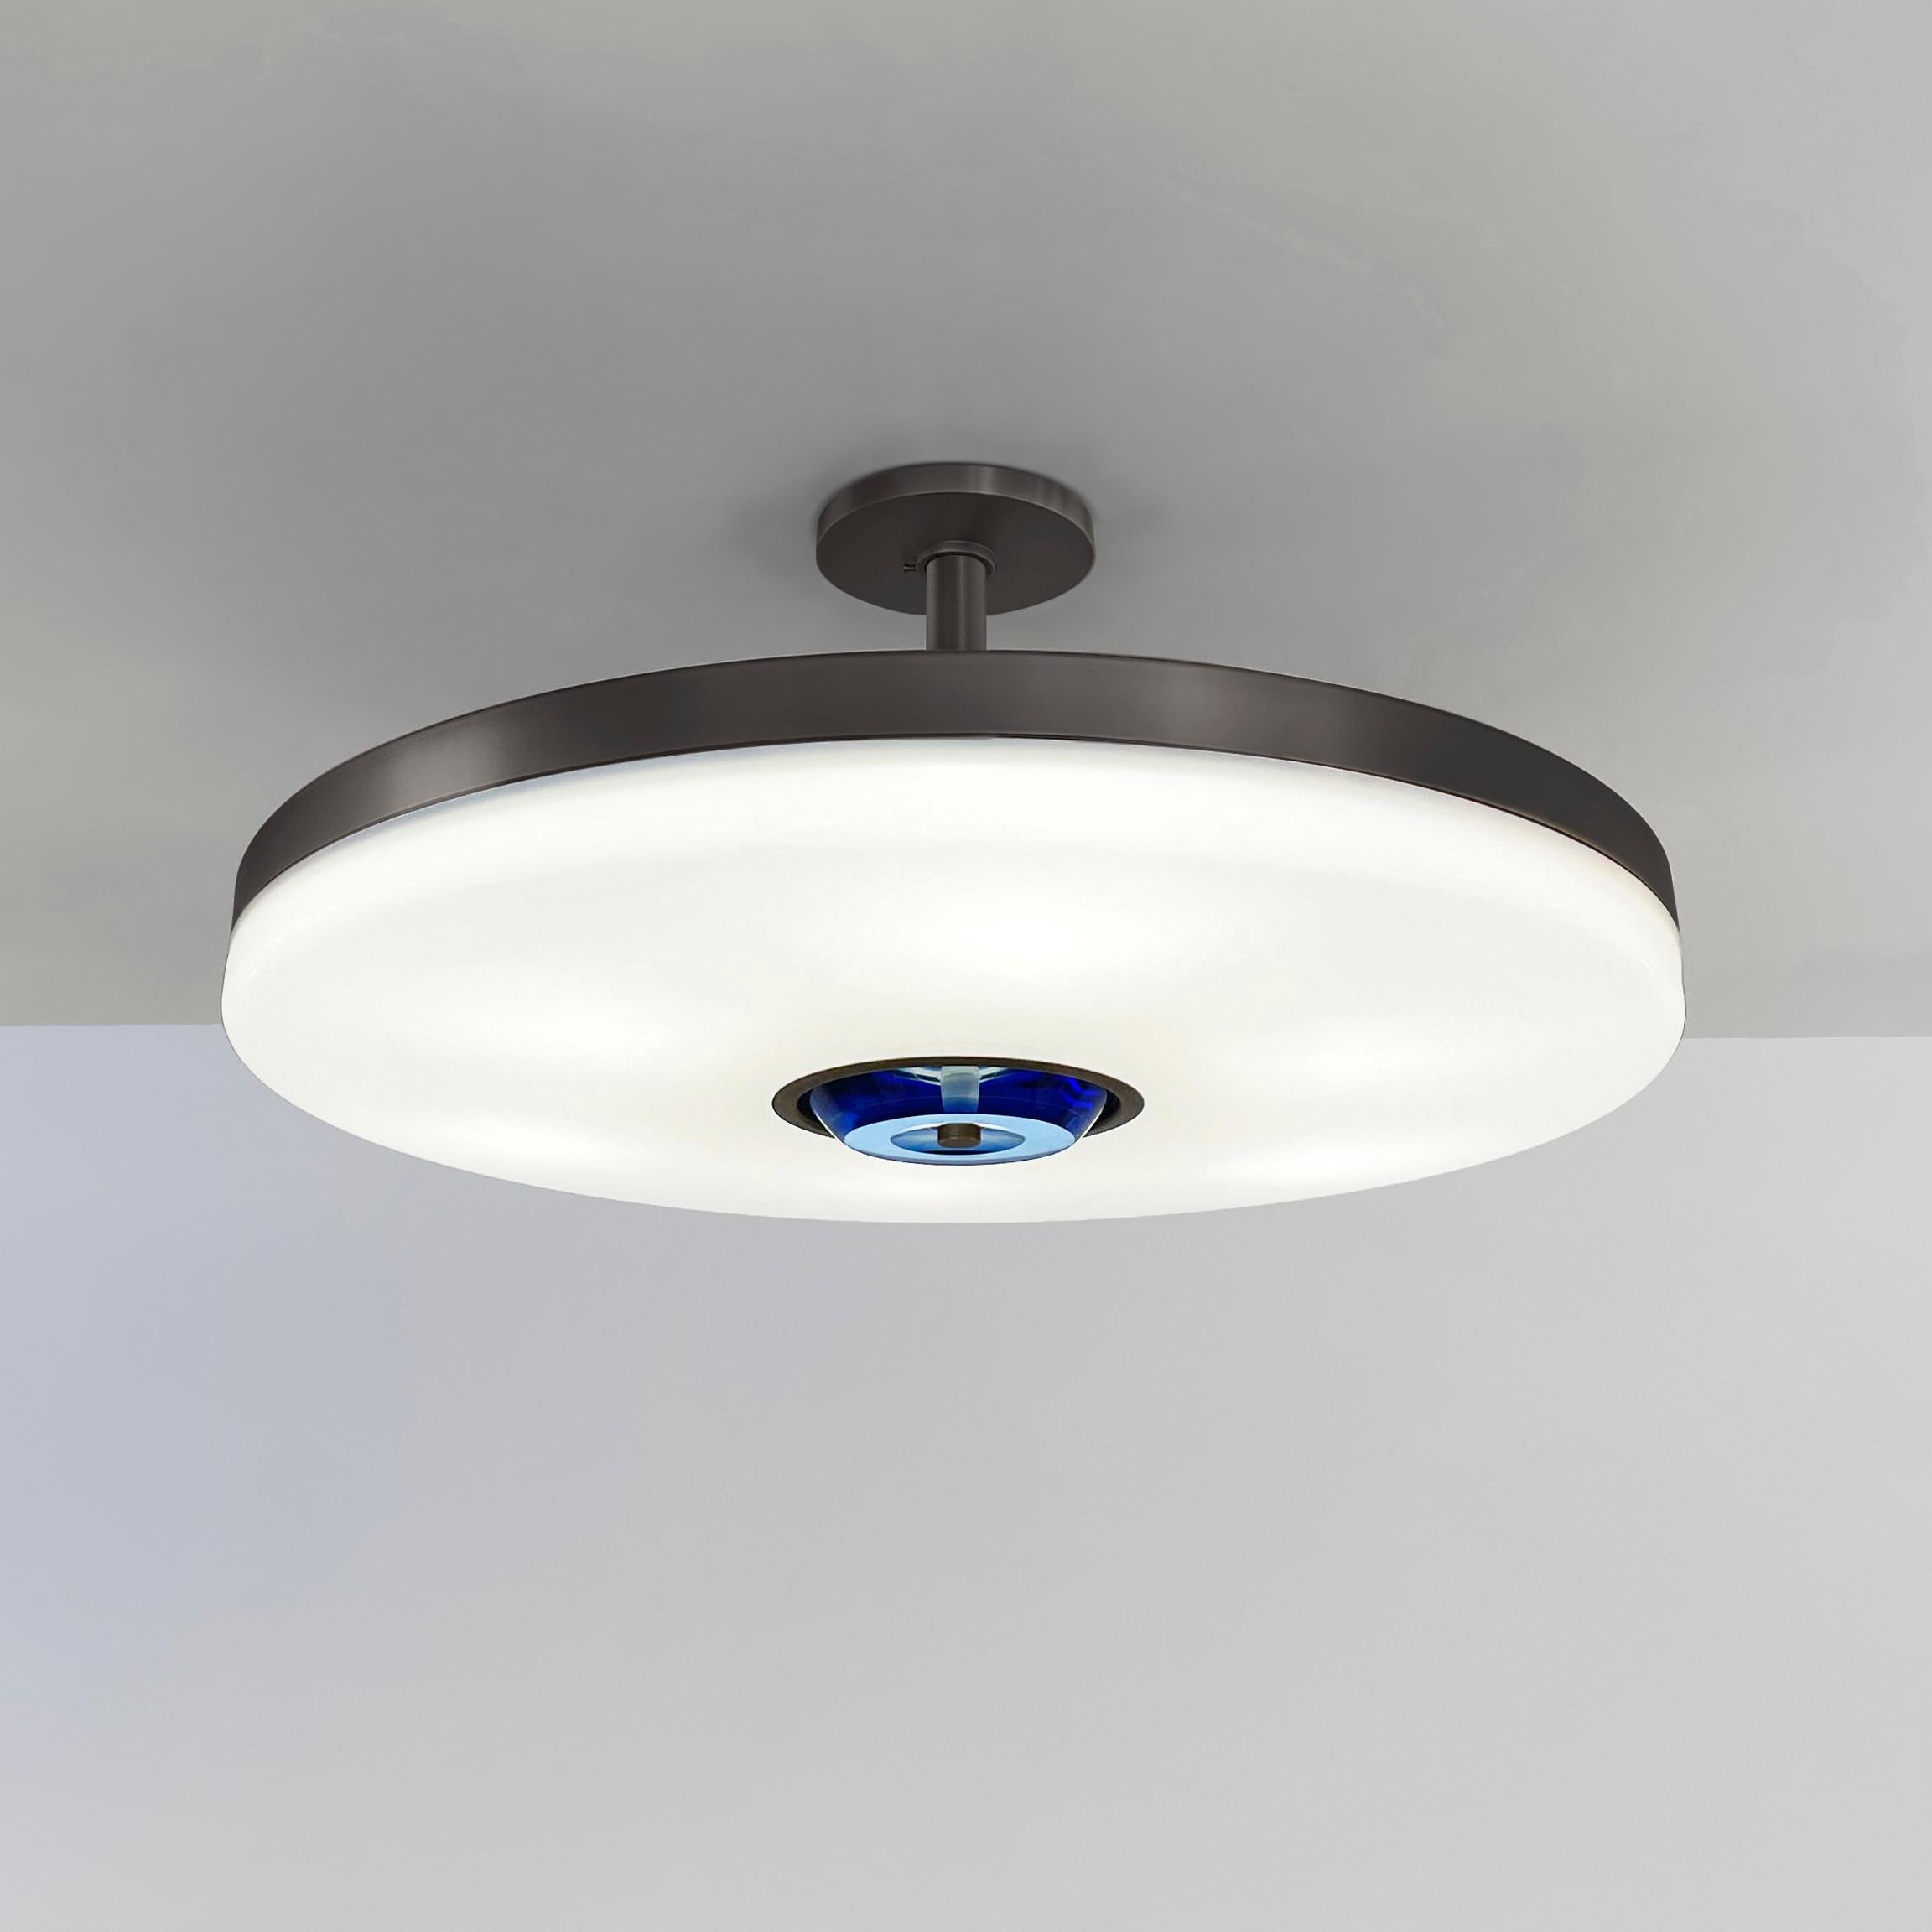 The Iris ceiling is designed around an expansive acrylic shade with a hand carved glass center. This versatile fixture can be installed as a pendant on a stem or as a true flush mount. The first images show the fixture in our Brunito Nero (black